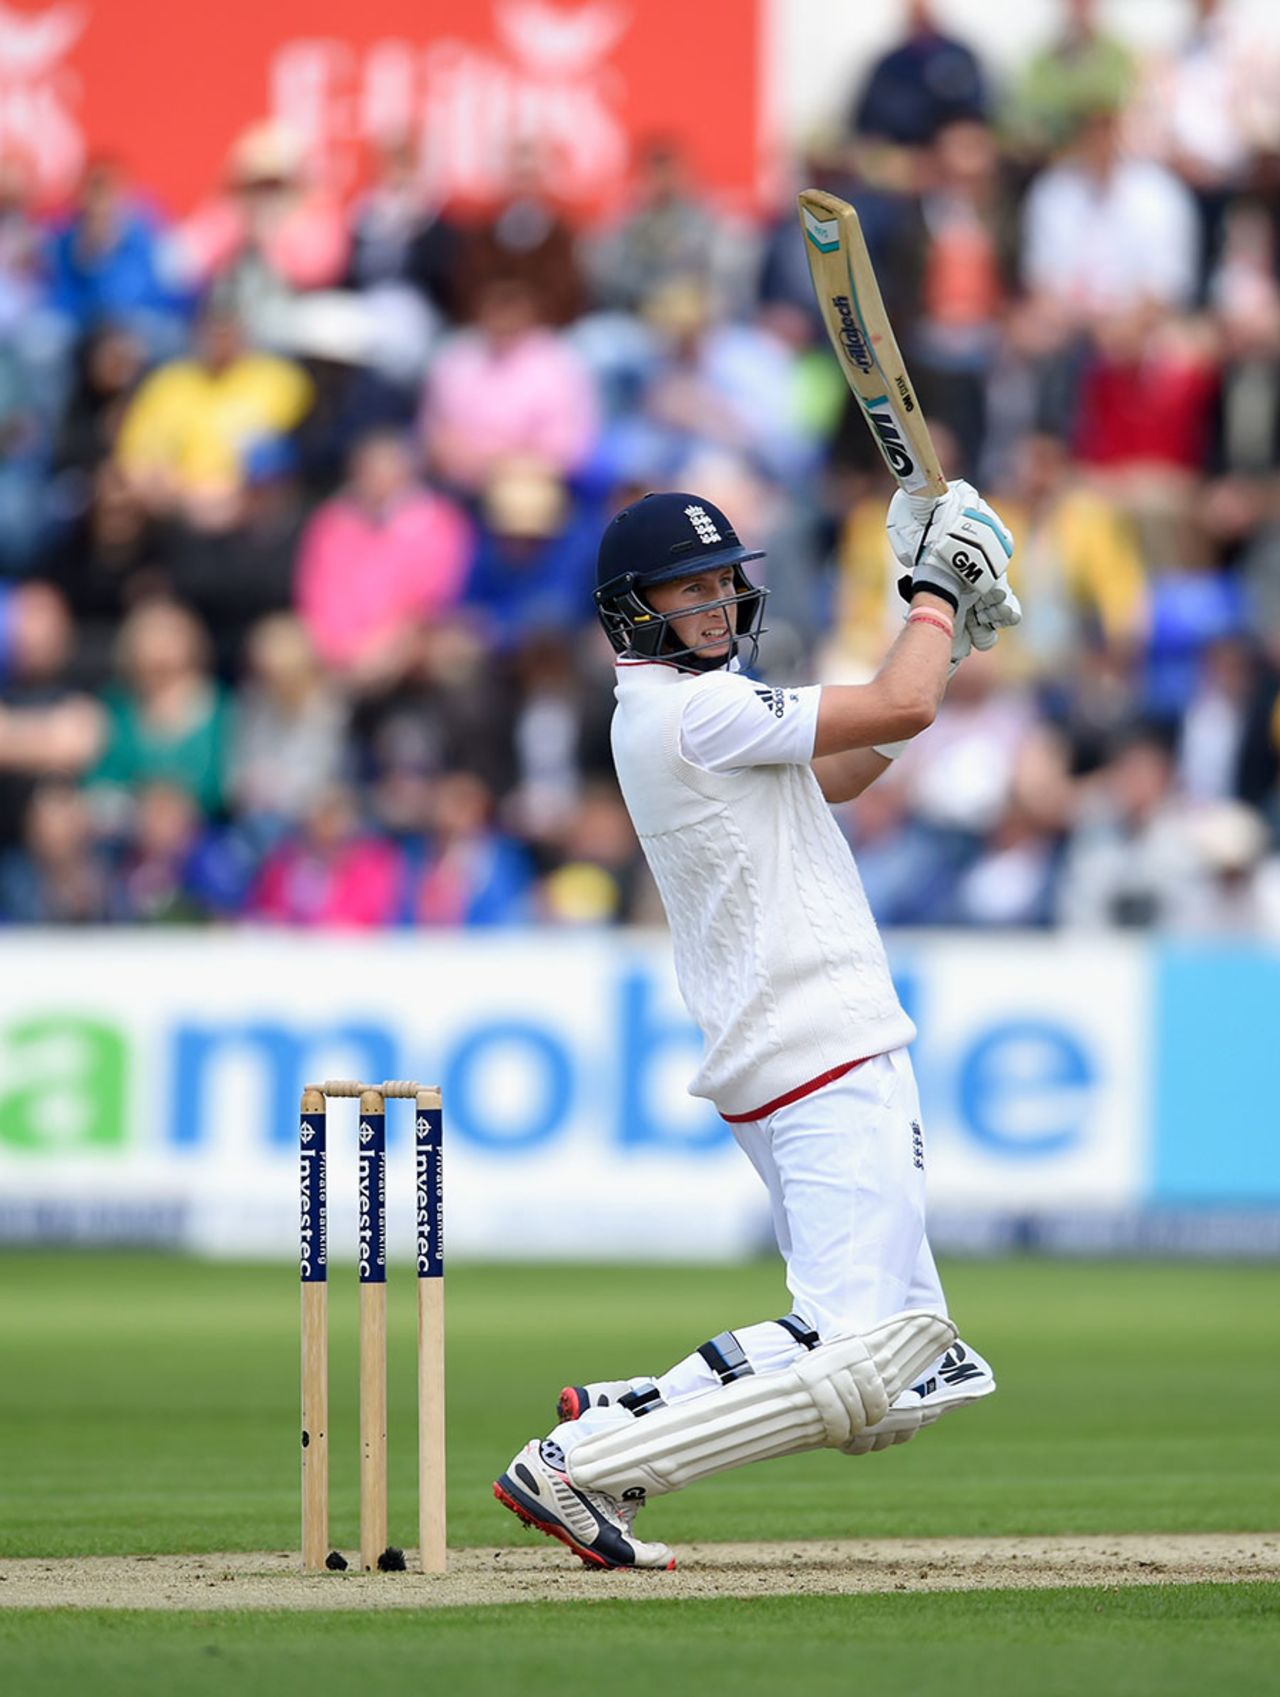 Joe Root was severe on anything short and wide, England v Australia, 1st Investec Ashes Test, Cardiff, 1st day, July 8, 2015